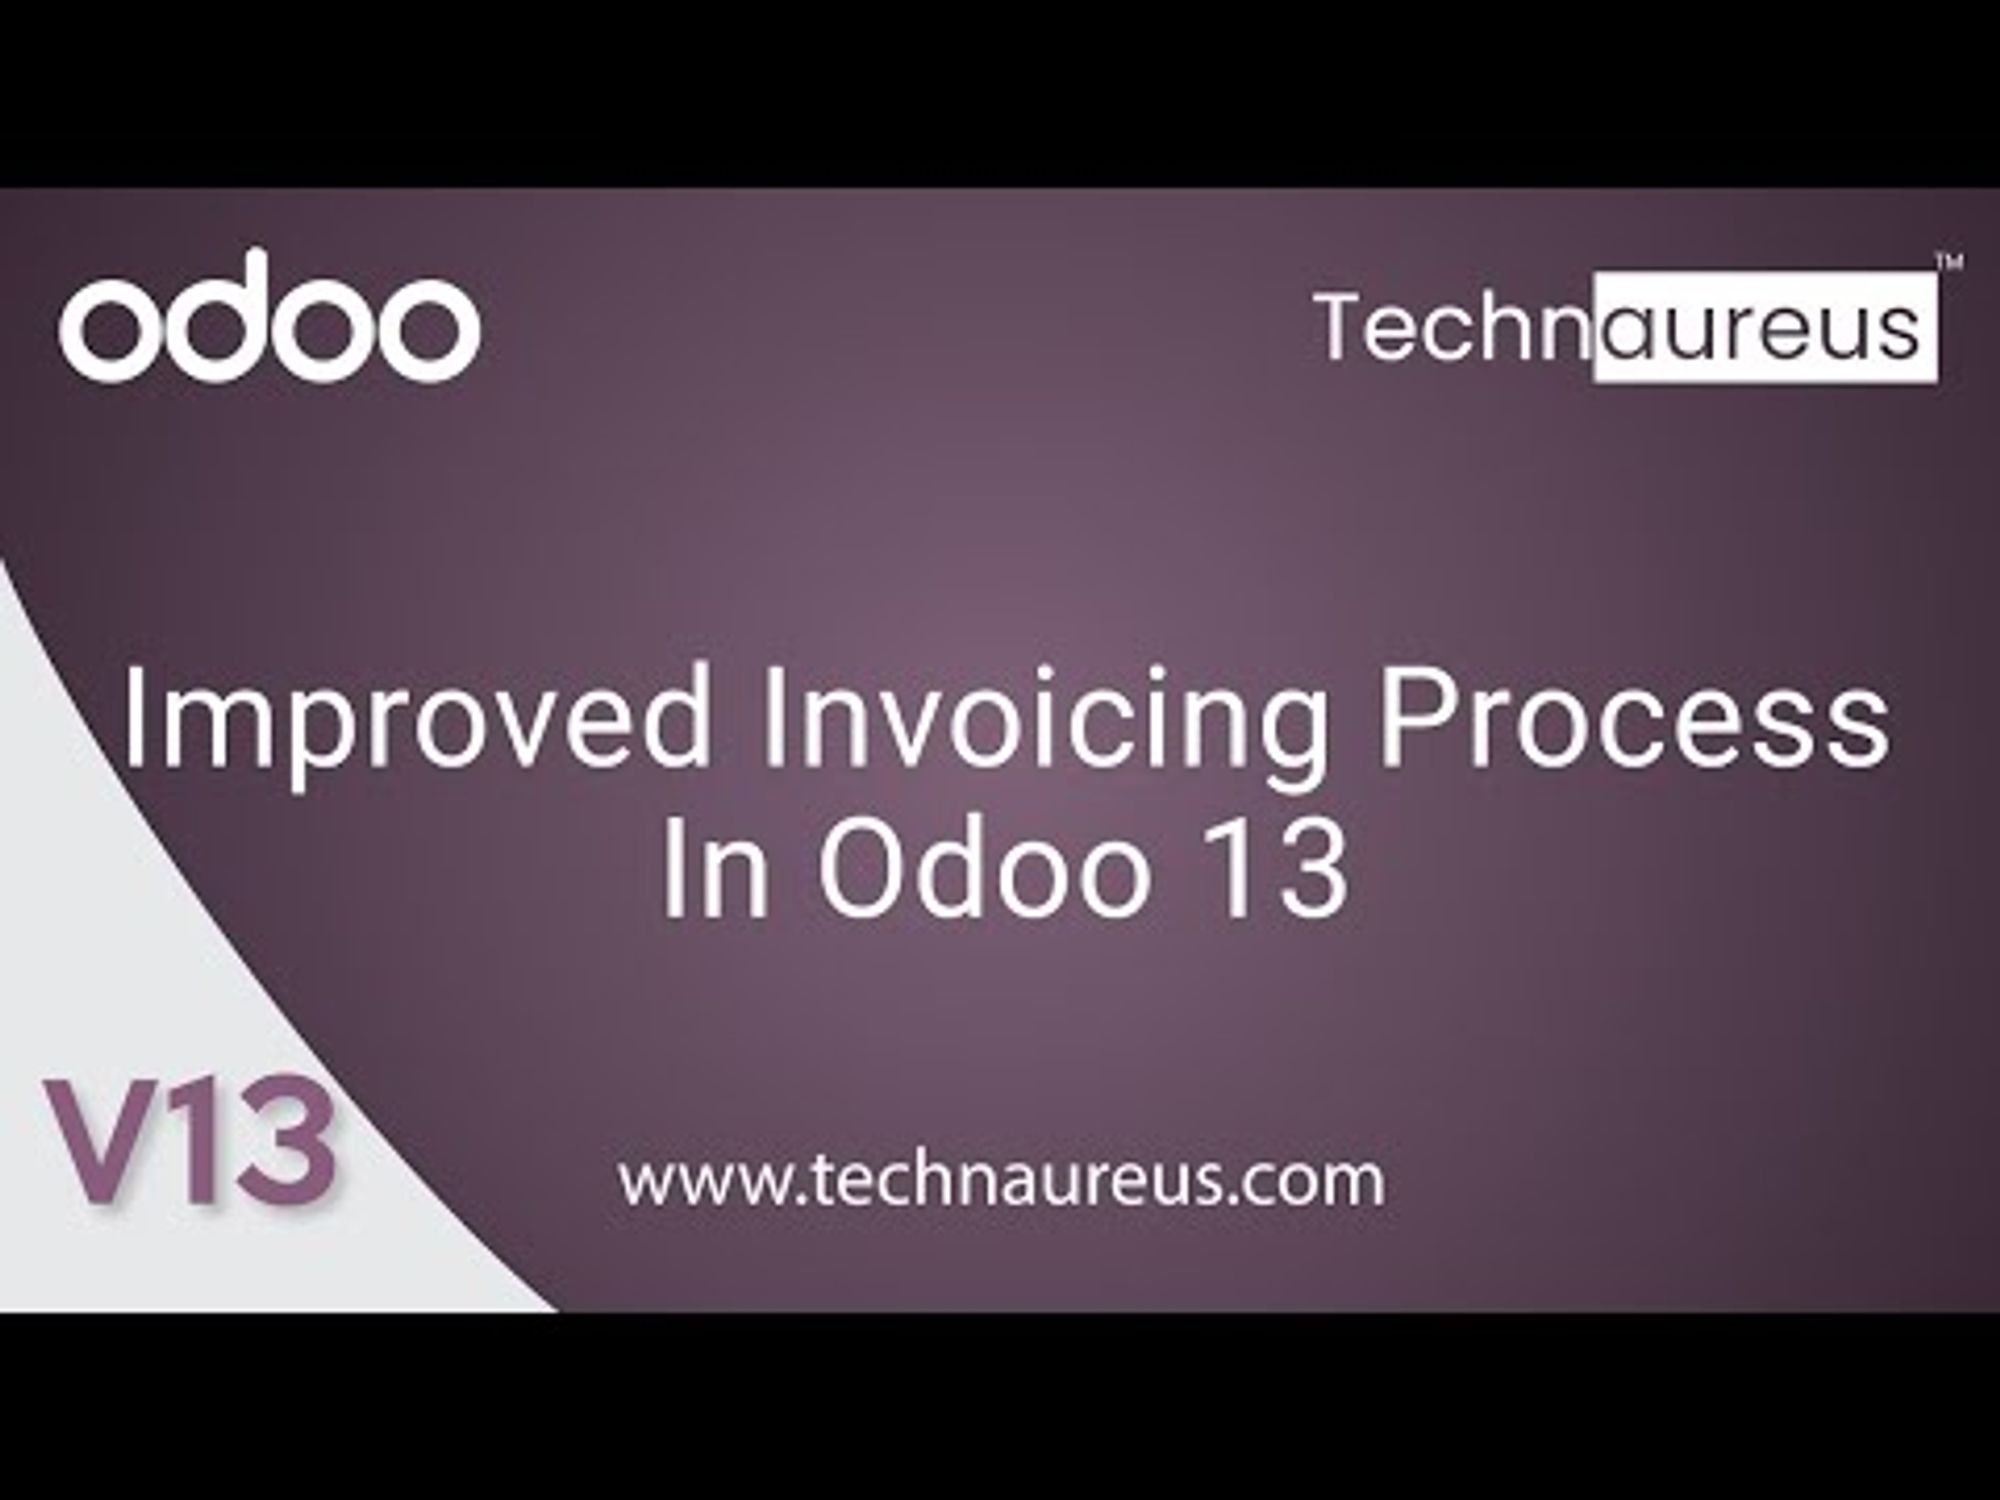 Improved Invoicing Process In Odoo 13 | Odoo Features